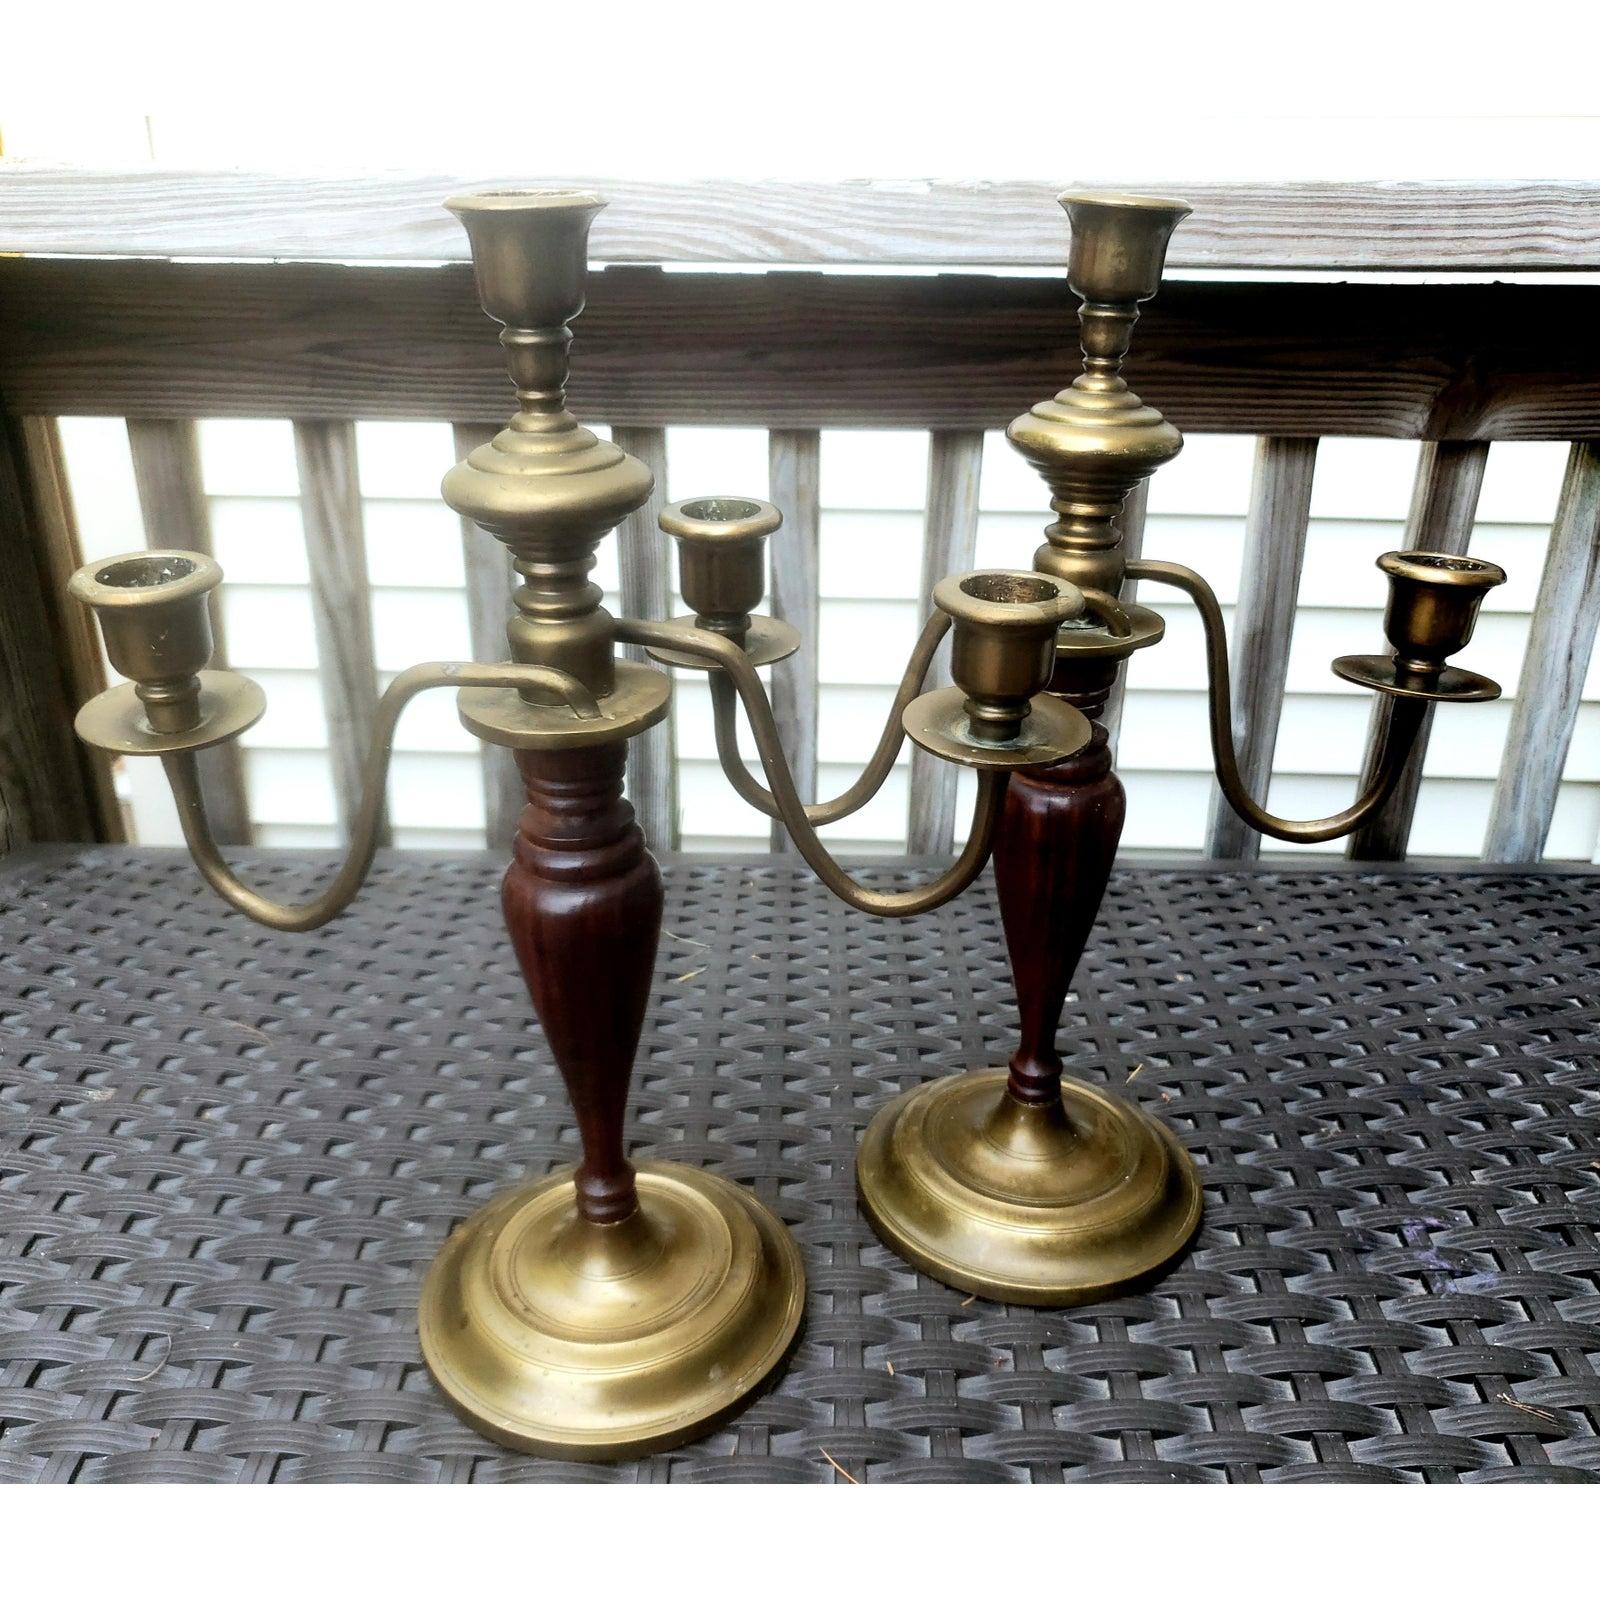 Victorian 19th Century Mahogany and Brass Candelabras, a Pair For Sale